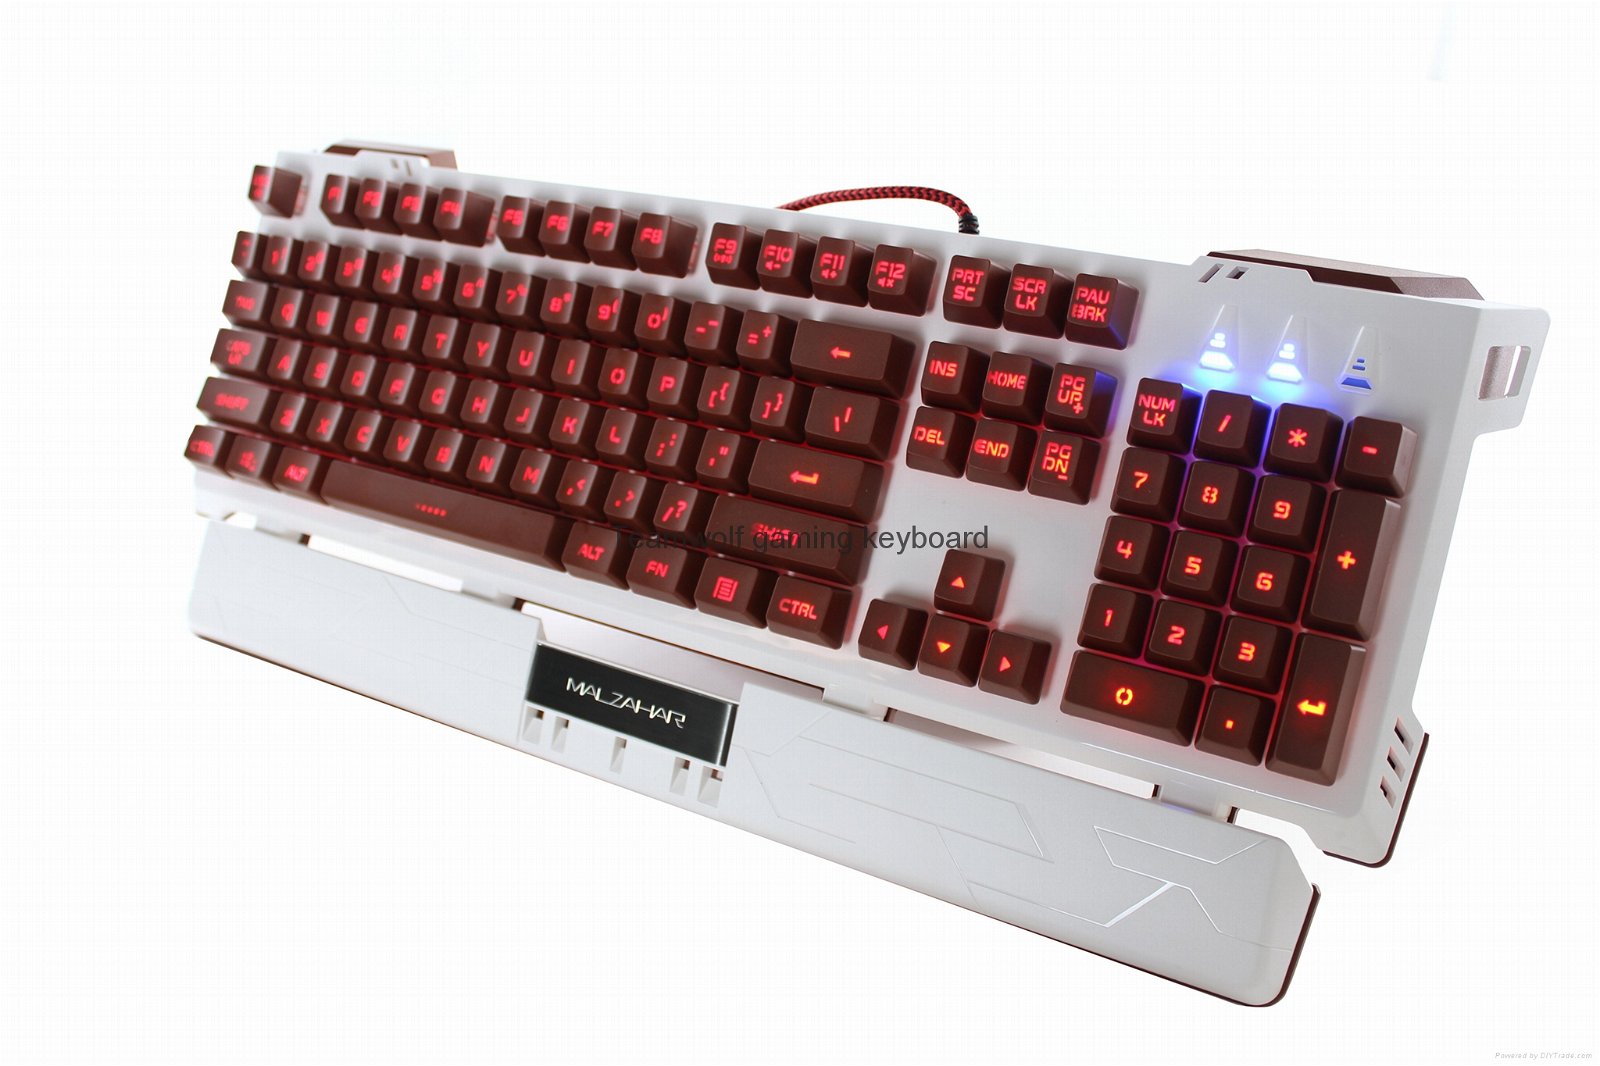 Arbiter-TEAMWOLF wired Membrain gaming keyboard with color Mixed light-AK616 2